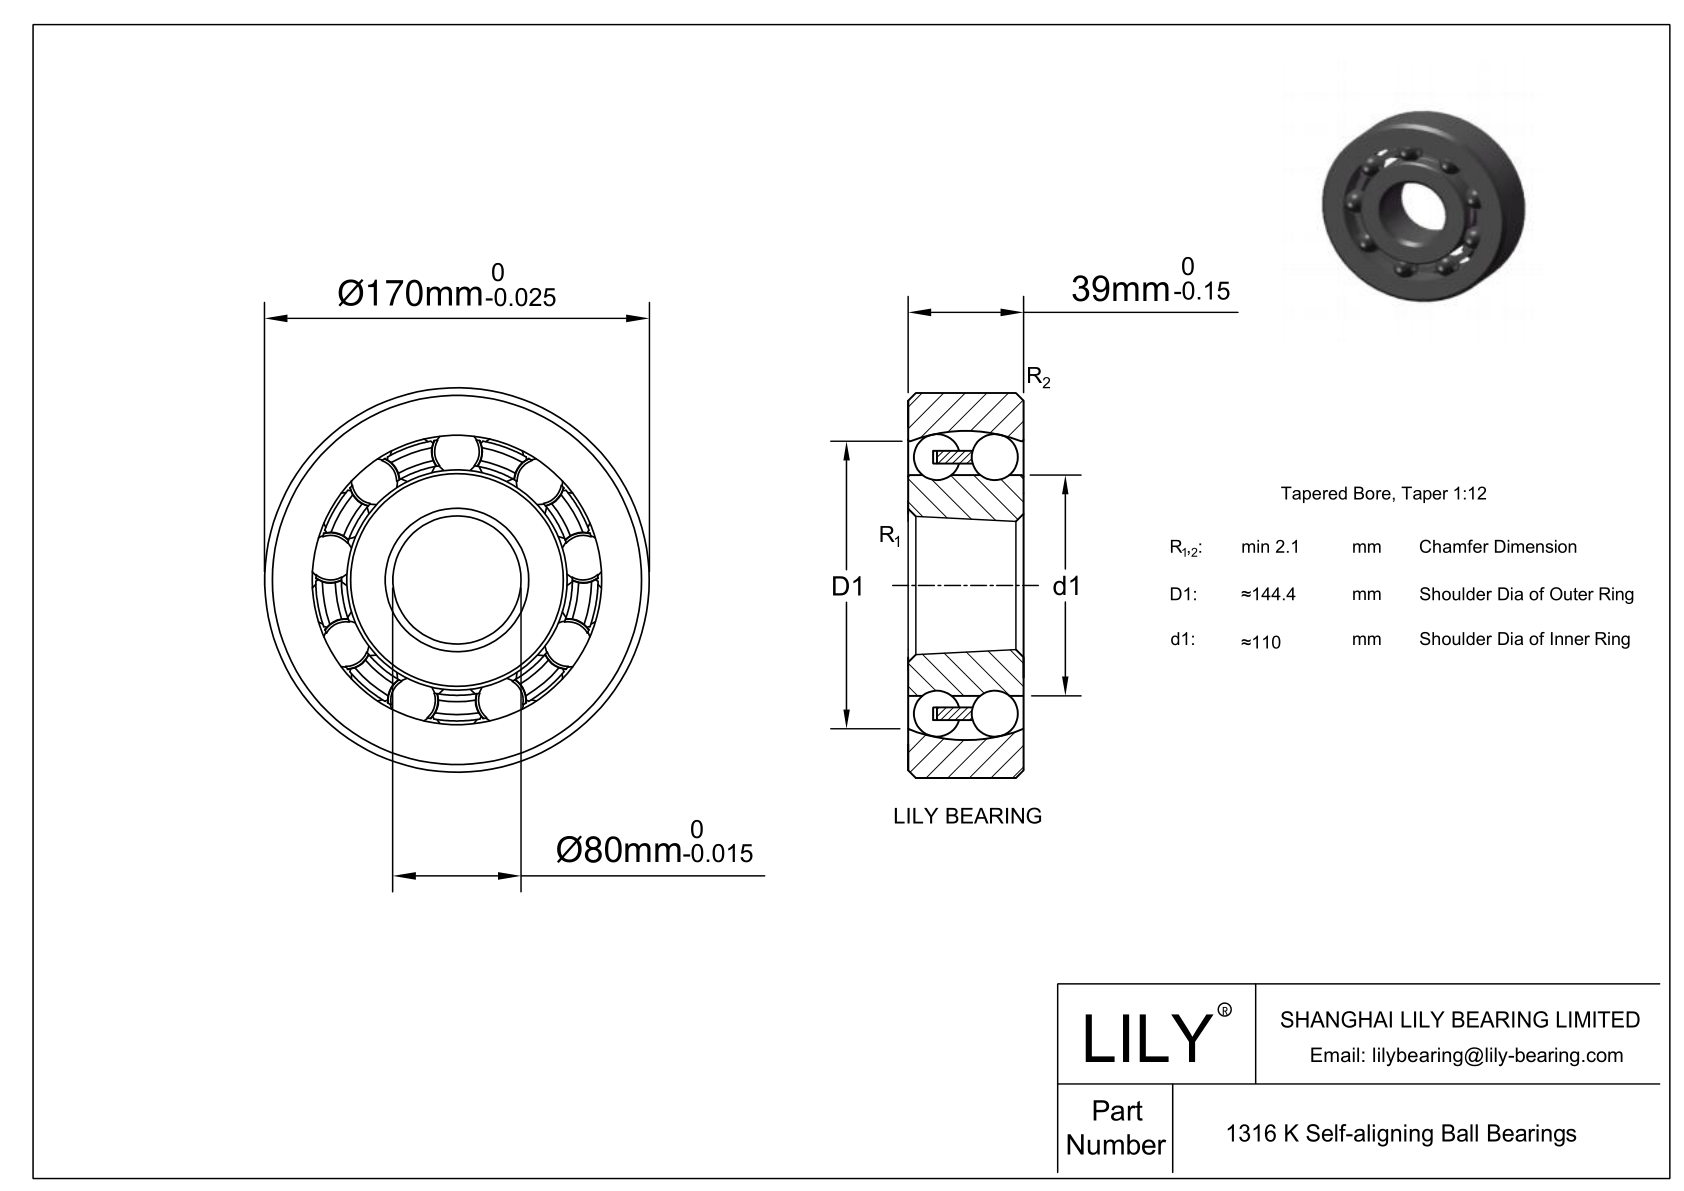 S1316 K Stainless Steel Self Aligning Ball Bearings cad drawing